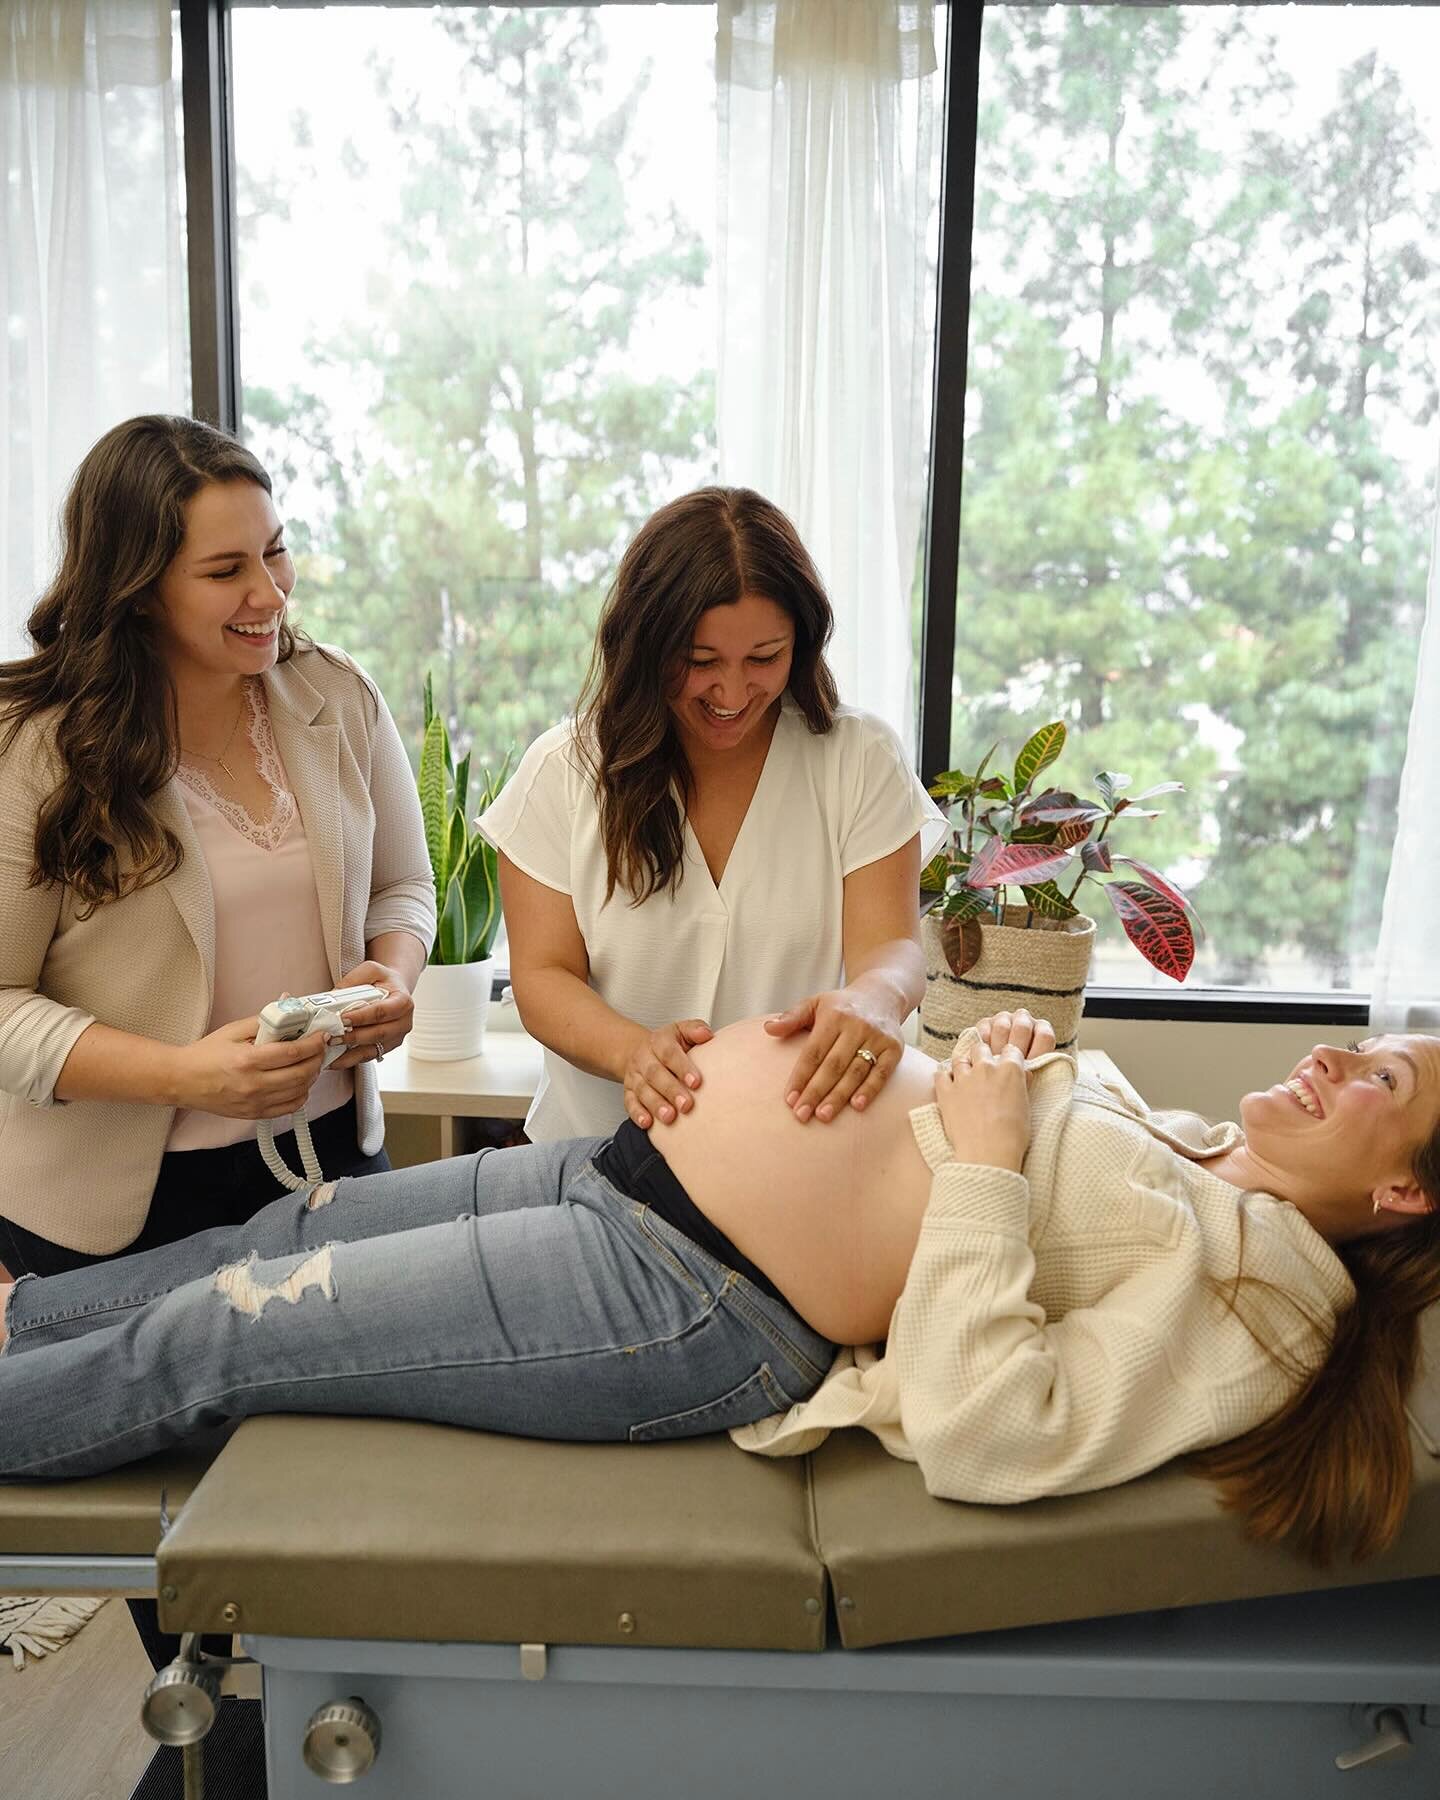 Come for the home birth, stay for the midwives. 

Midwifery care is so much more than just a check in on your baby, it&rsquo;s full spectrum care for mom too. 

#homebirth #midwives #homebirthmidwives #lifeofamidwife #waterbirth #naturalbirth #physio